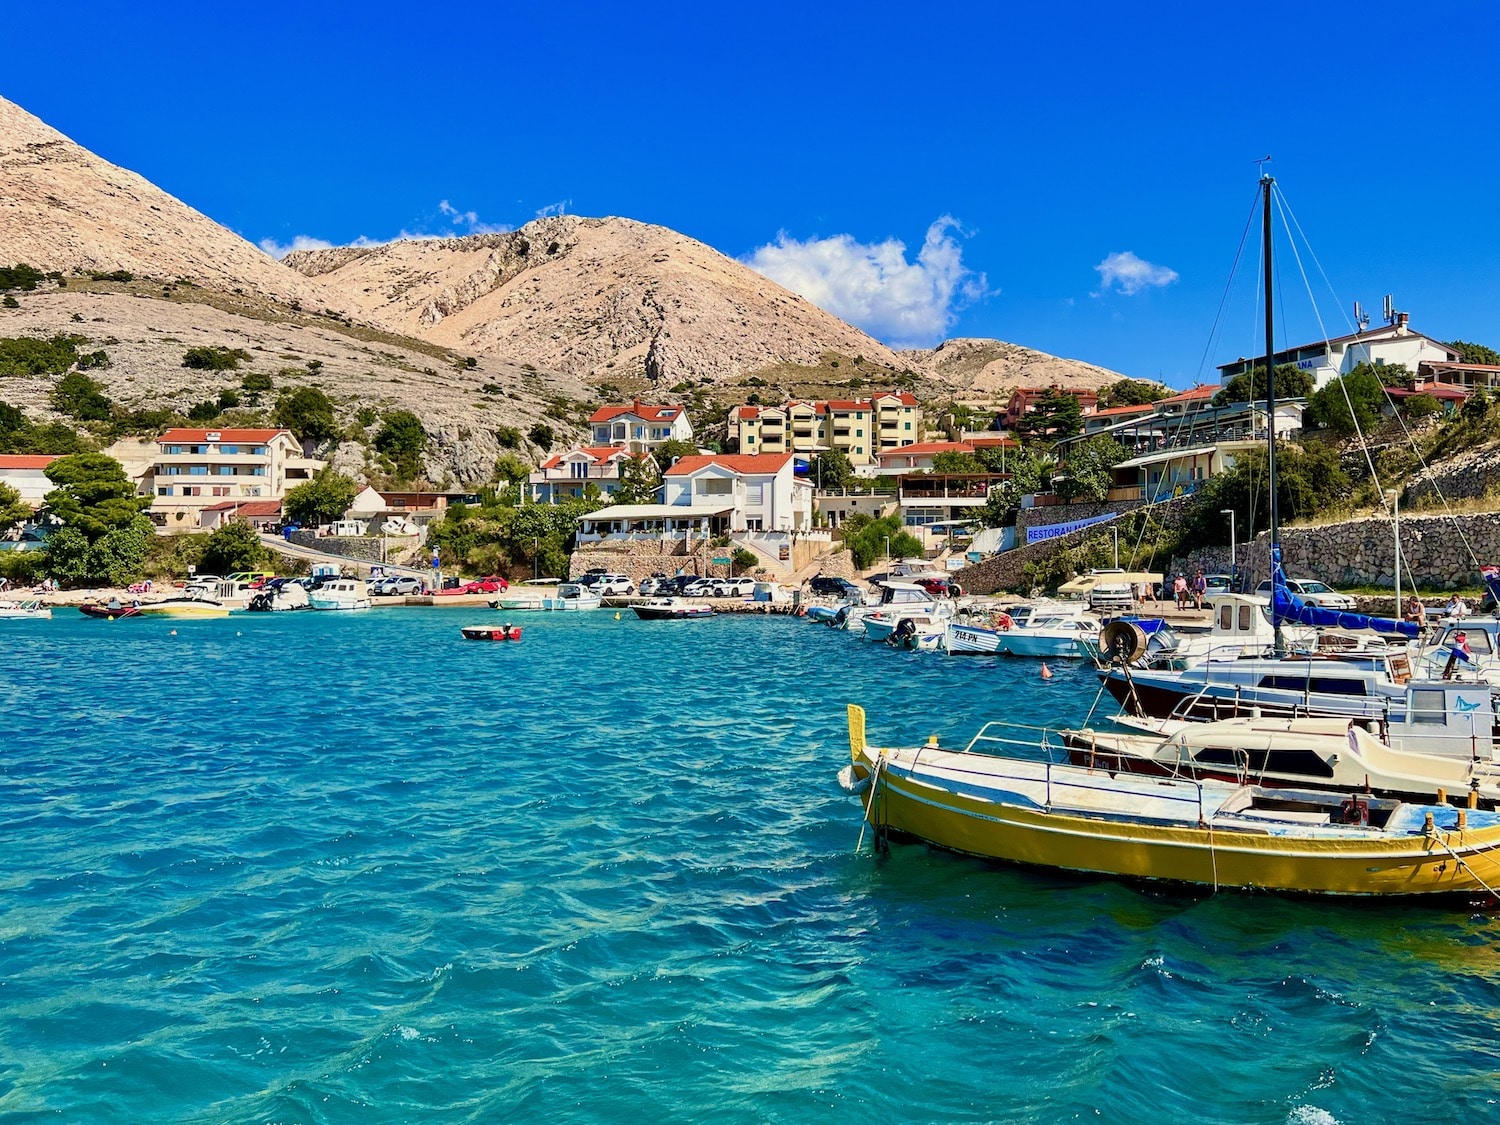 Since my trip, I've been a big fan of the island of Krk - it's a beautiful, Mediterranean retreat that's a great place to relax. Photo: Sascha Tegtmeyer Travel report Krk tips experiences experience report